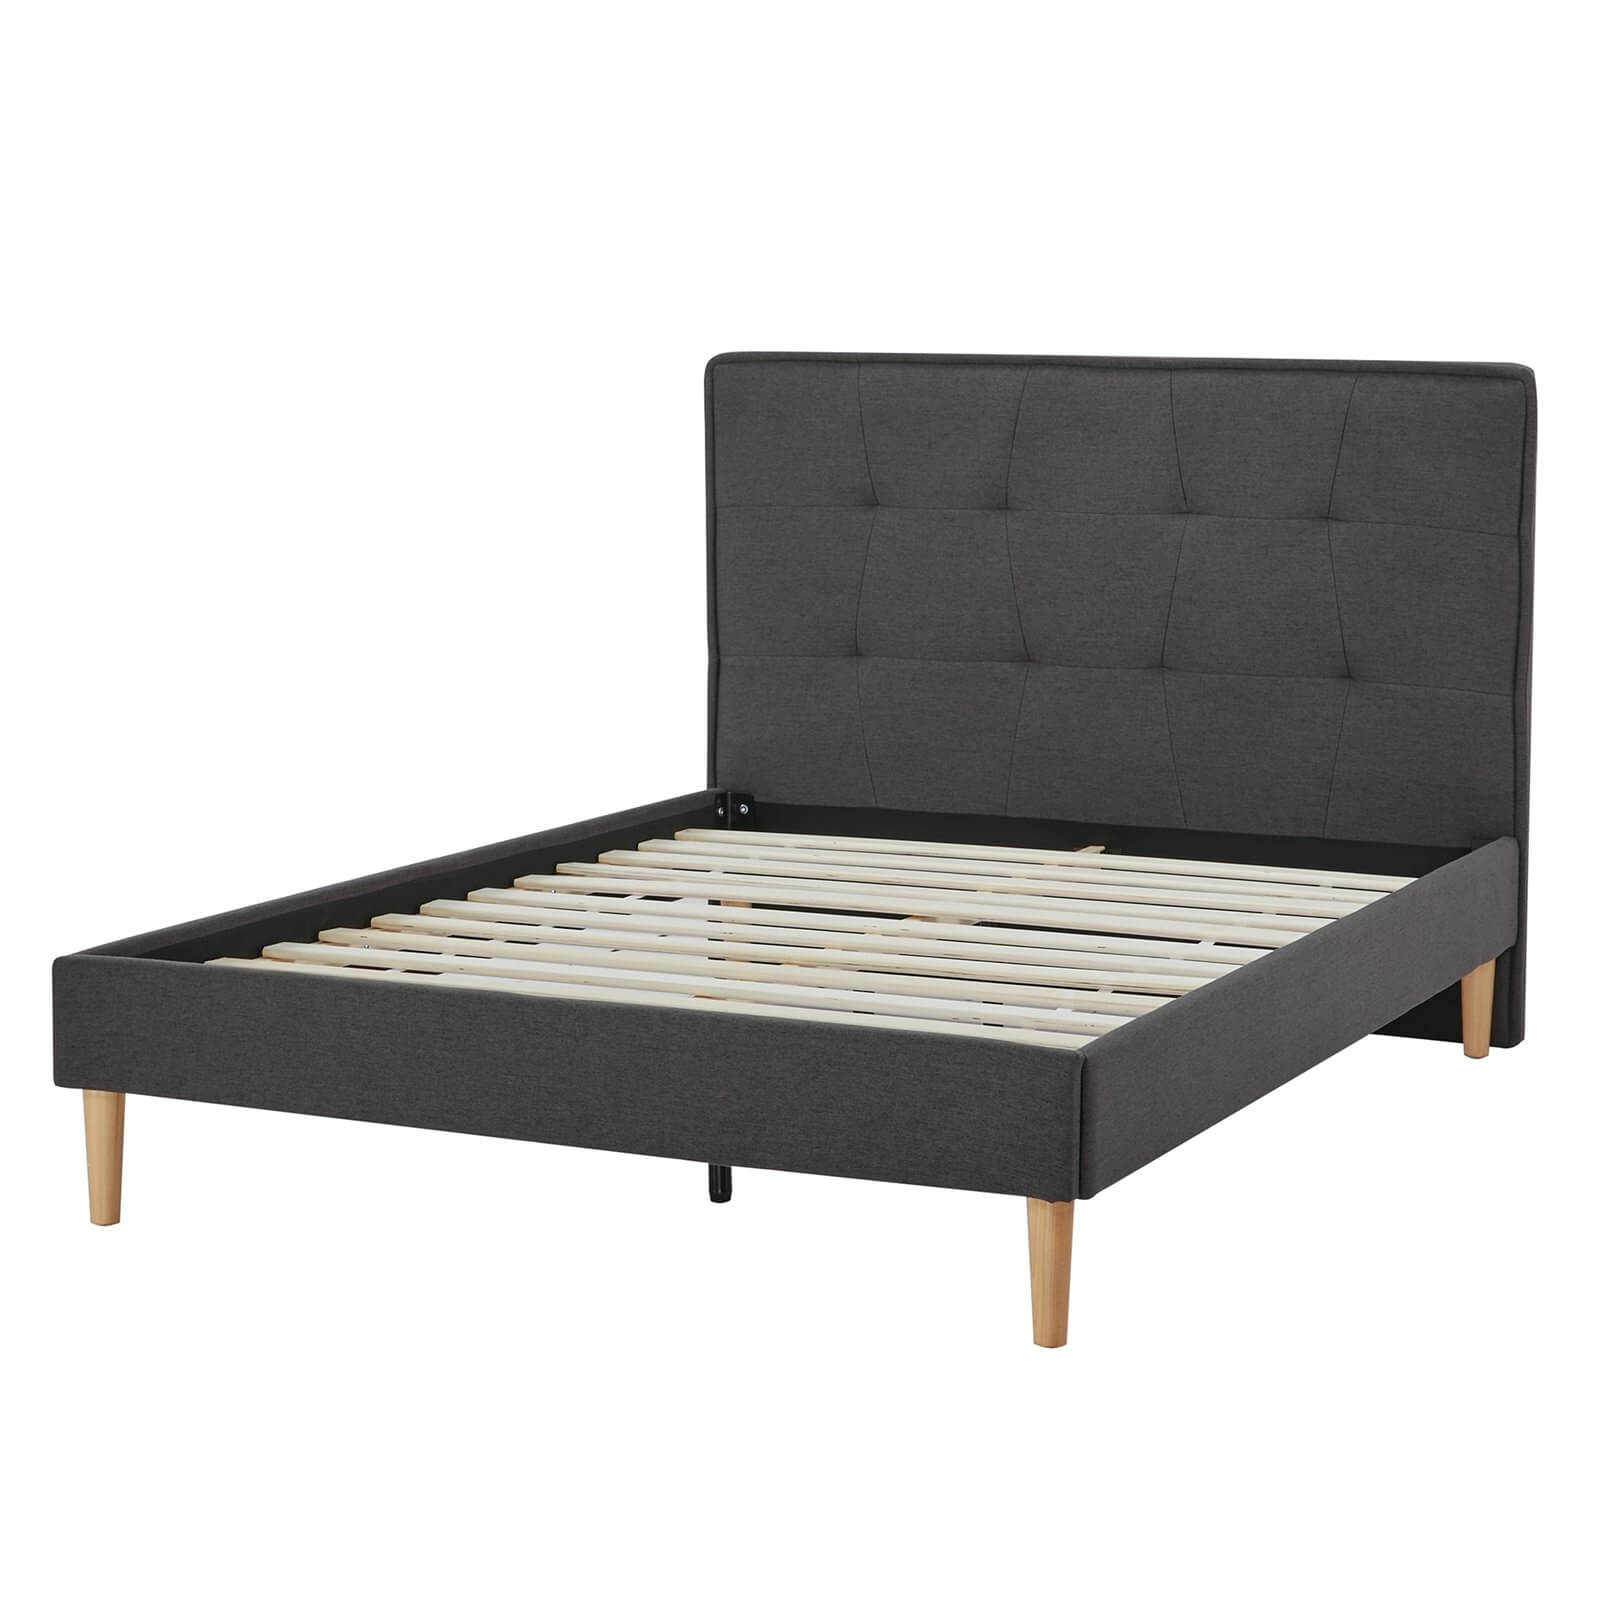 Metro Upholstered Double Bed Frame